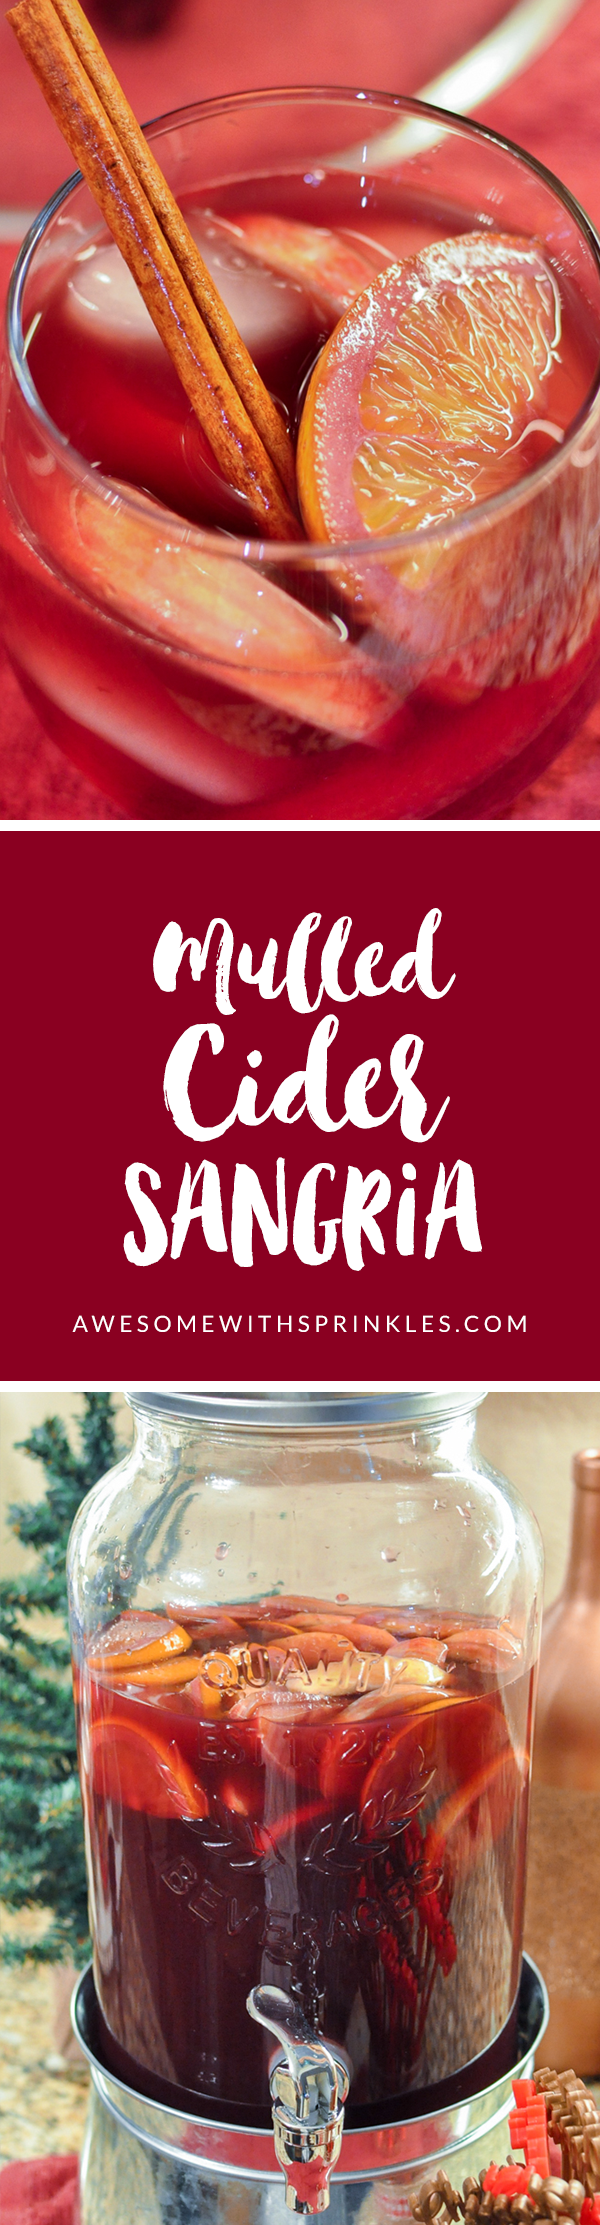 Mulled Cider Sangria | Awesome with Sprinkles